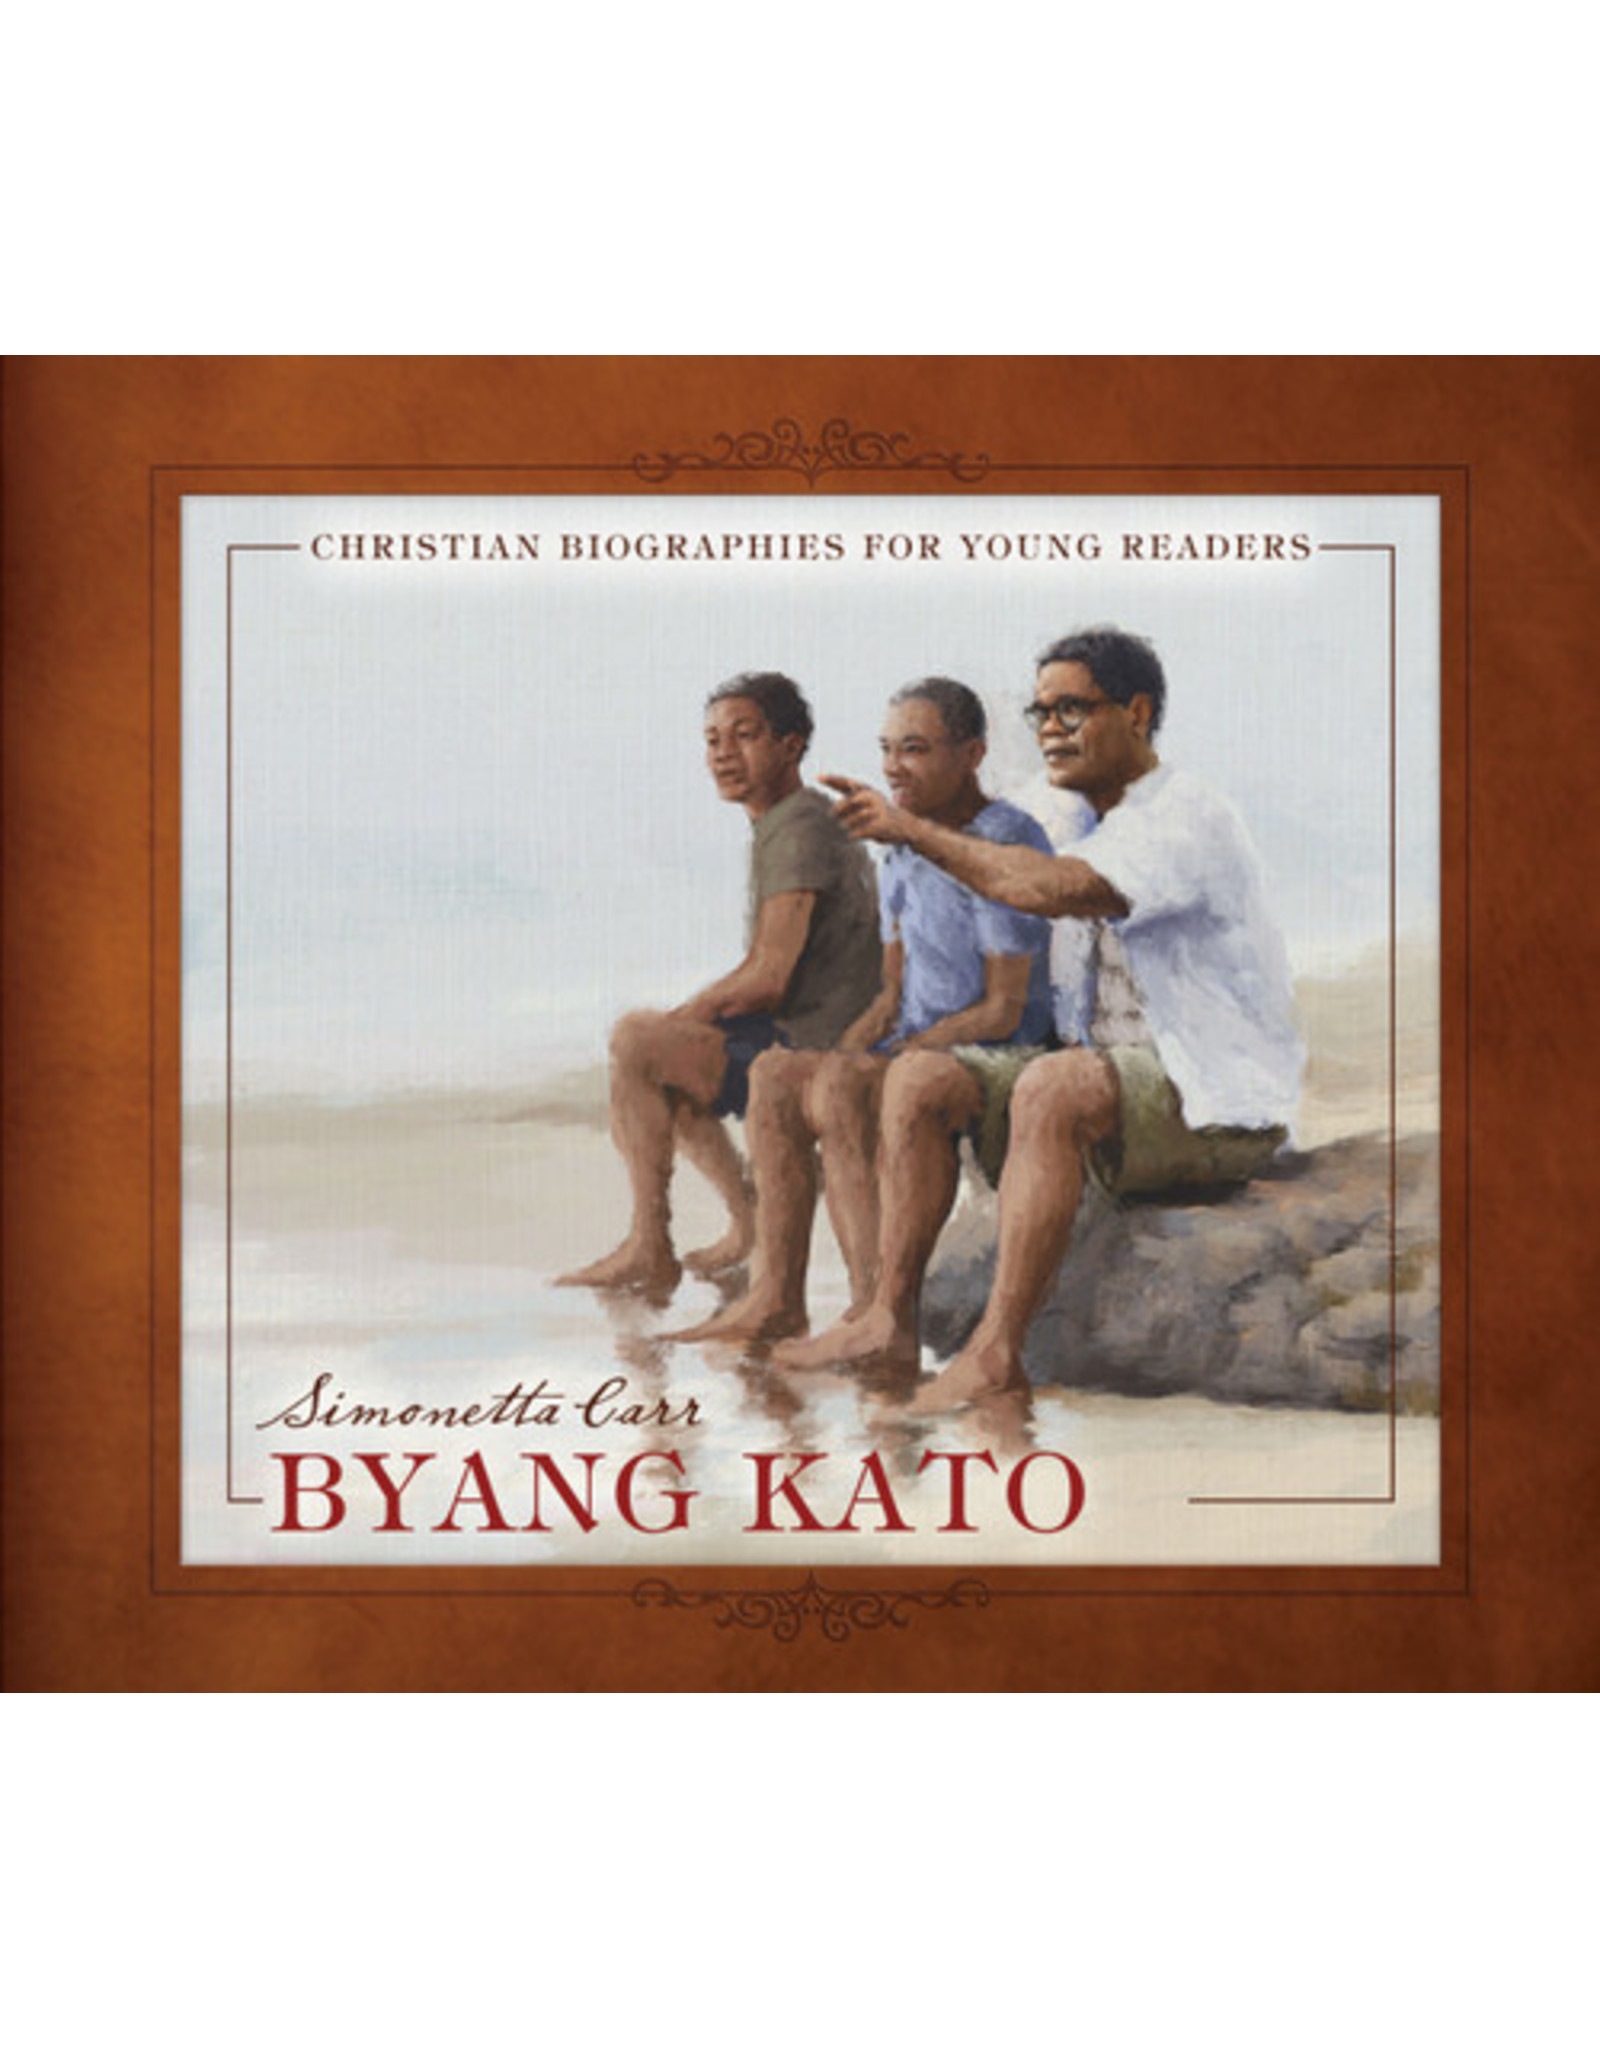 Simonetta Carr Byang Kato- Christian Biographies for Young Readers